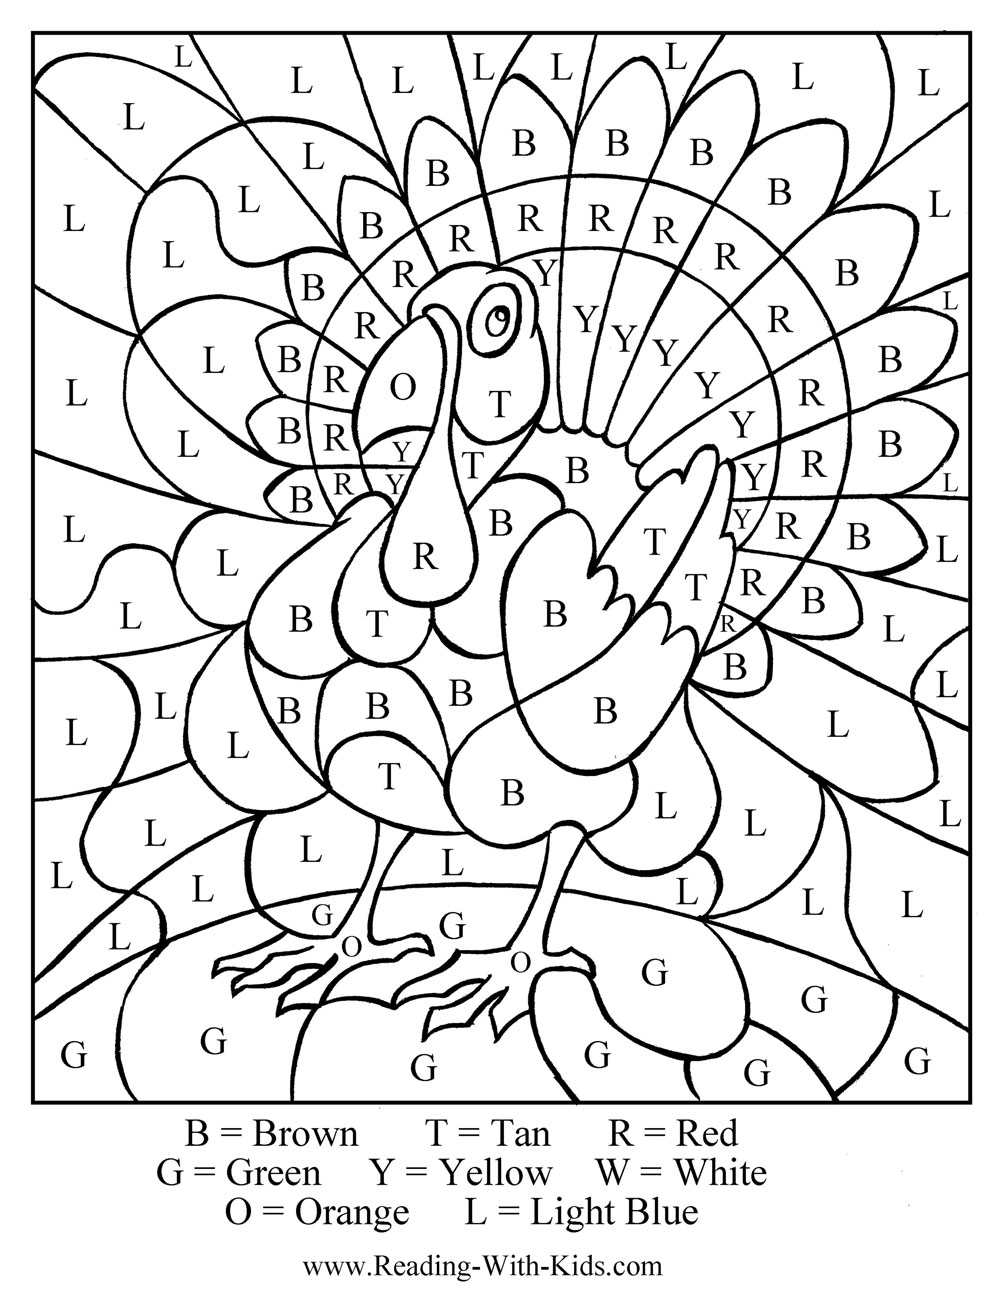 free-thanksgiving-coloring-pages-games-printables-thankgiving